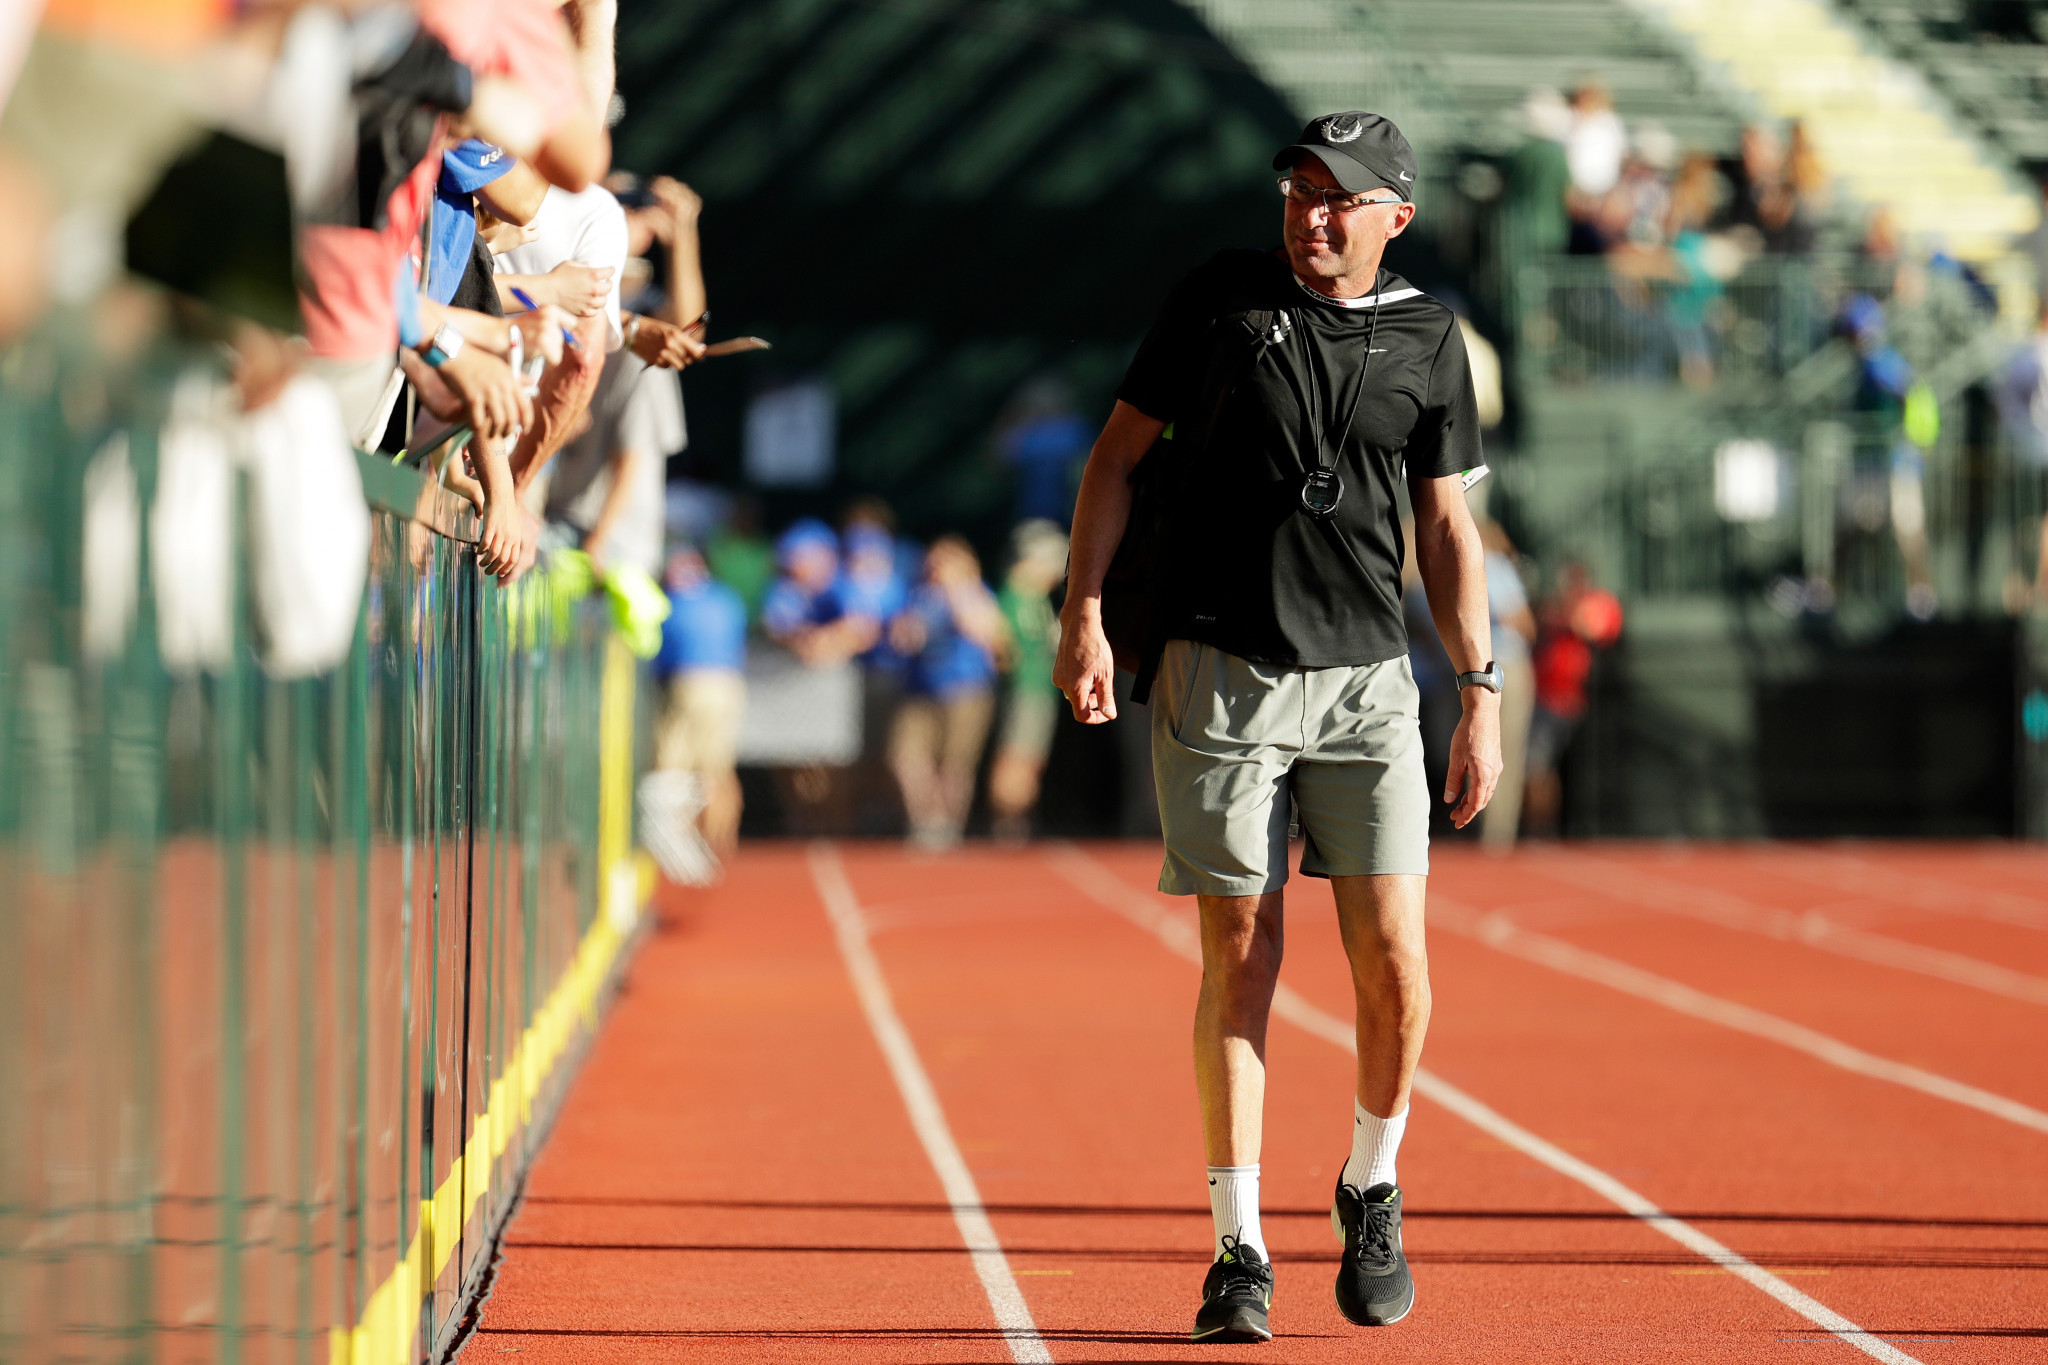 Sifan Hassan's coach Alberto Salazar has been stripped of his accreditation for the IAAF World Championships after being banned by the United States Anti-Doping Agency for four-years ©Getty Images